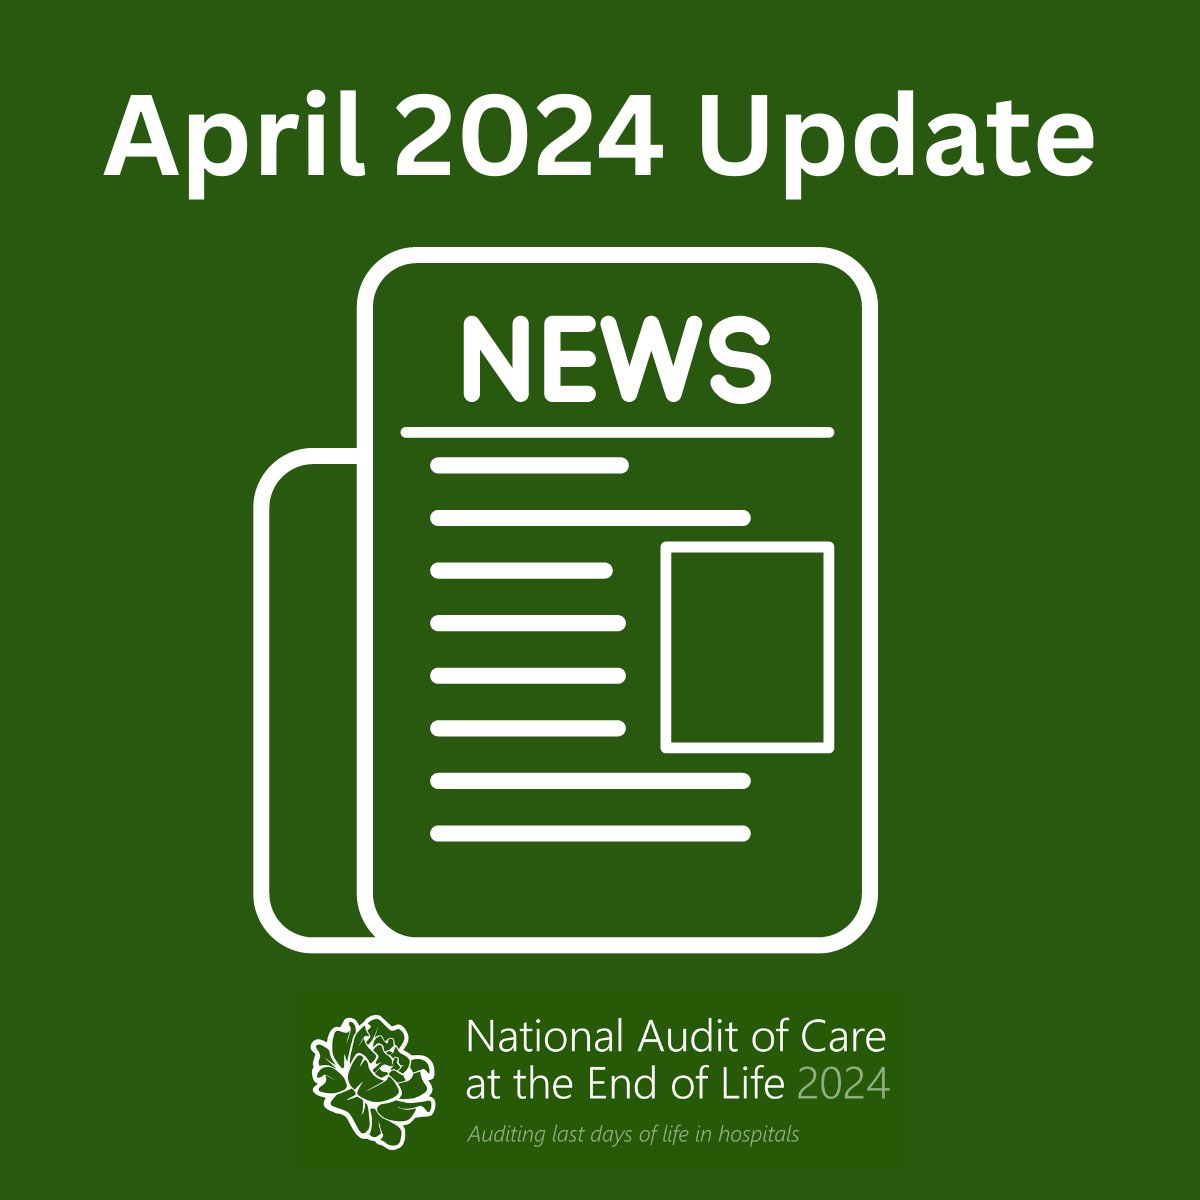 The latest NACEL 2024 newsletter has just been released, participants can find the update in their inbox now! Read about the latest NACEL updates including, participation figures, opening of the staff survey data collection, the release of the Quality Survey findings and more!